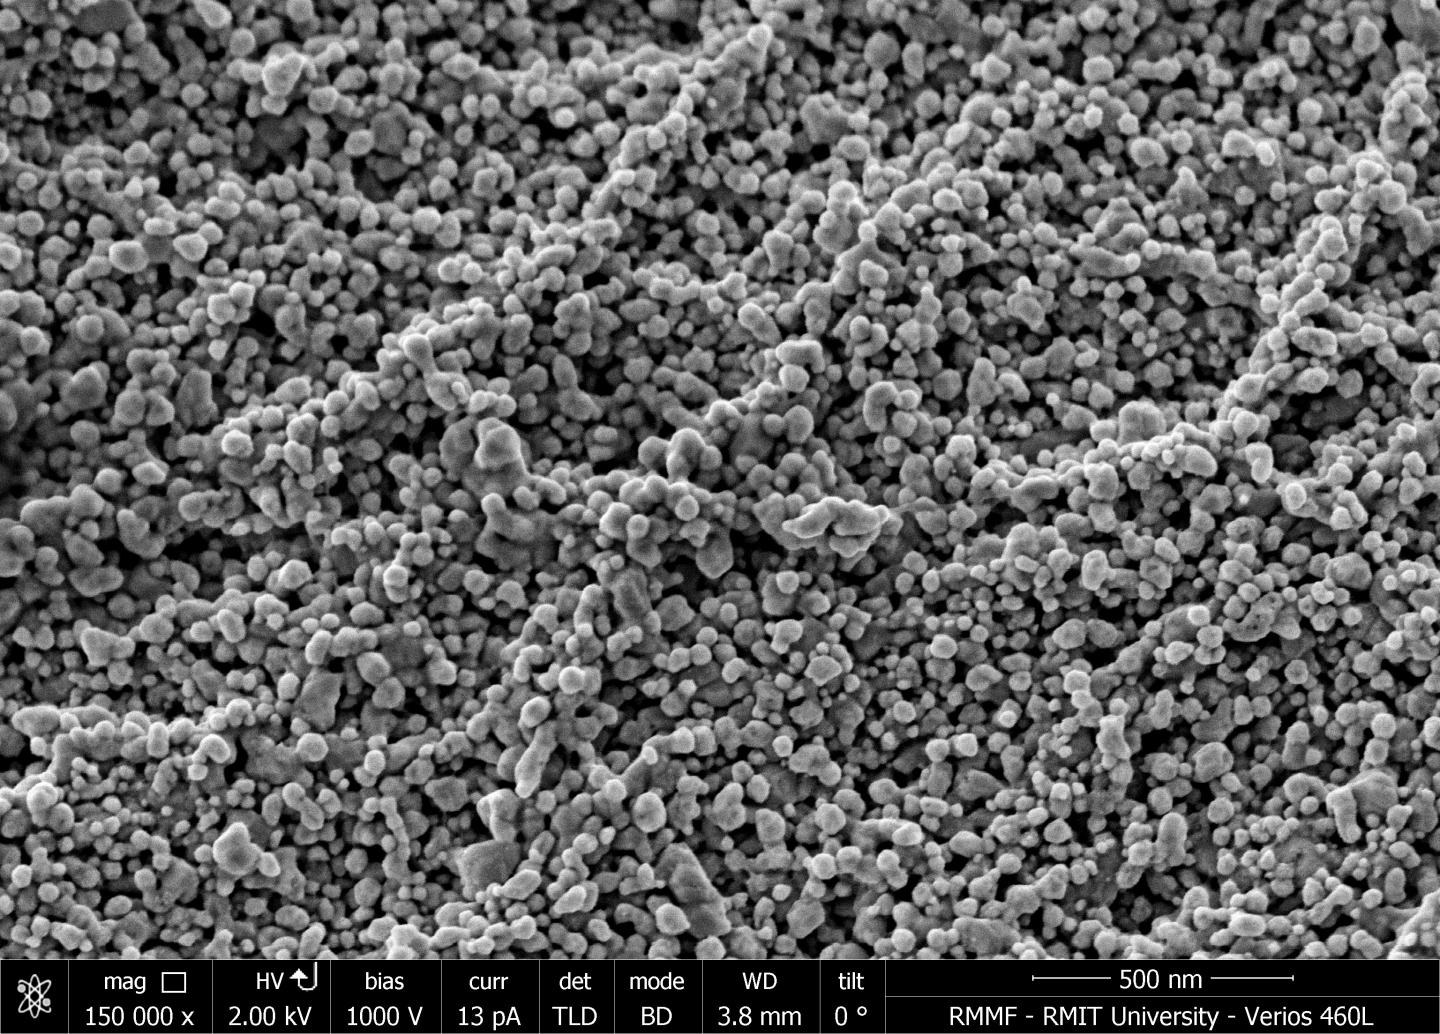 Caption: Close-up of the nanostructures grown on cotton textiles by RMIT University researchers. Image magnified 150,000 times. Credit: RMIT University